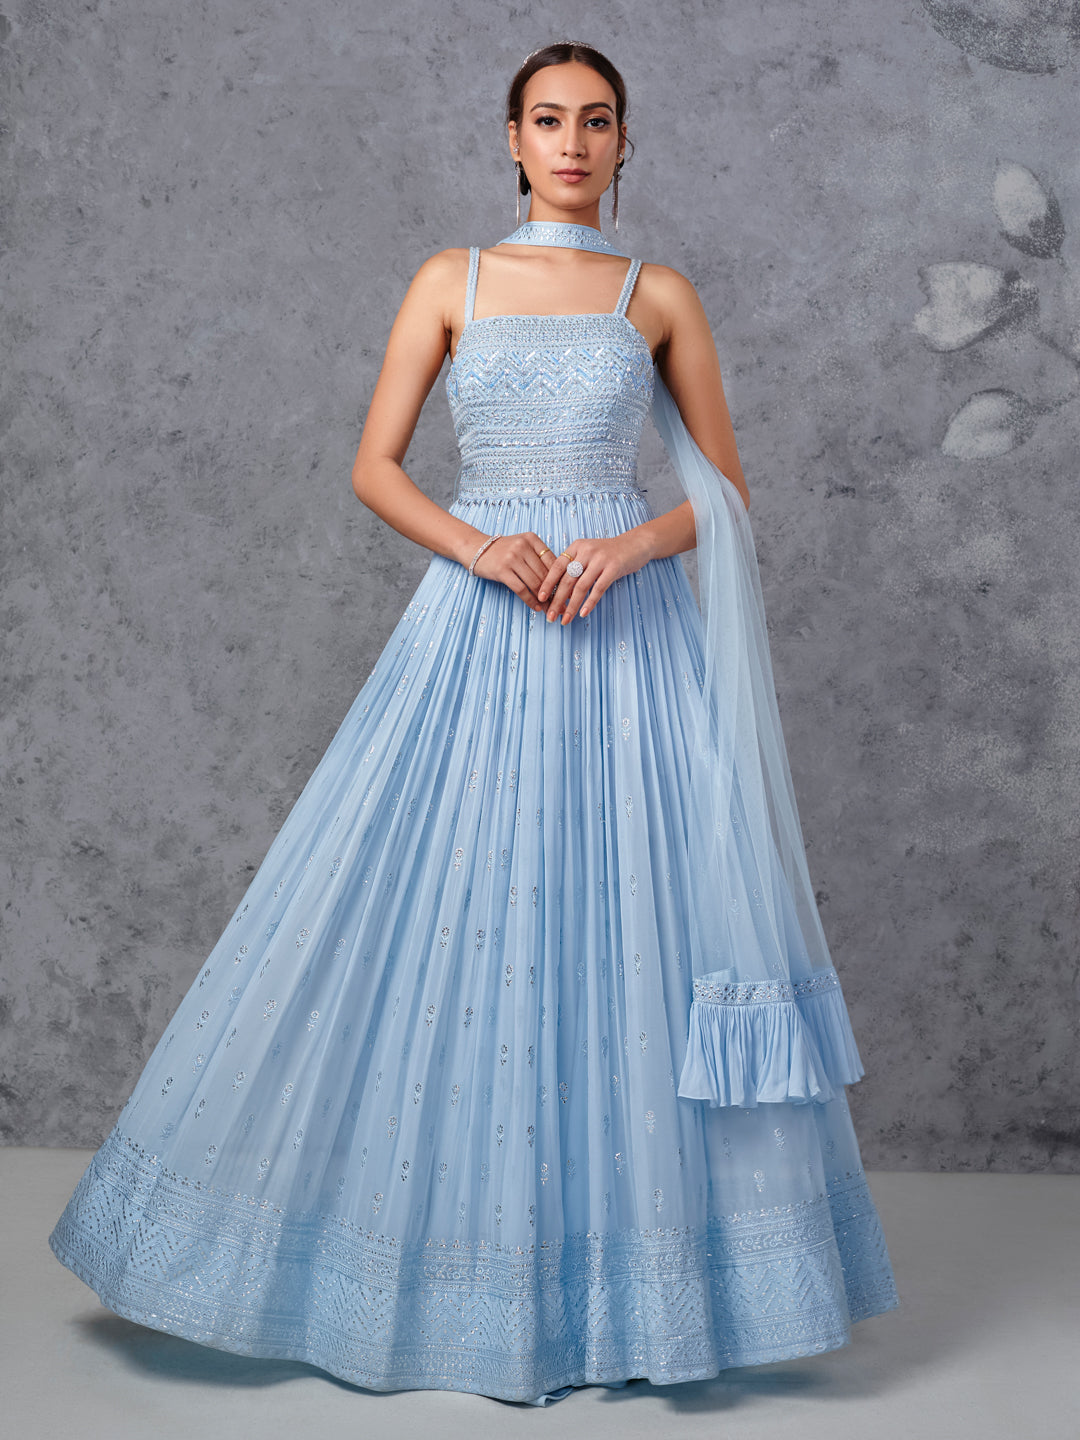 Royal Blue Princess Sequin Royal Blue Quinceanera Ball Gown With Puffy Lace  For Sweet 16 Special Occasion Party Style 248J From Ouri, $242.95 |  DHgate.Com